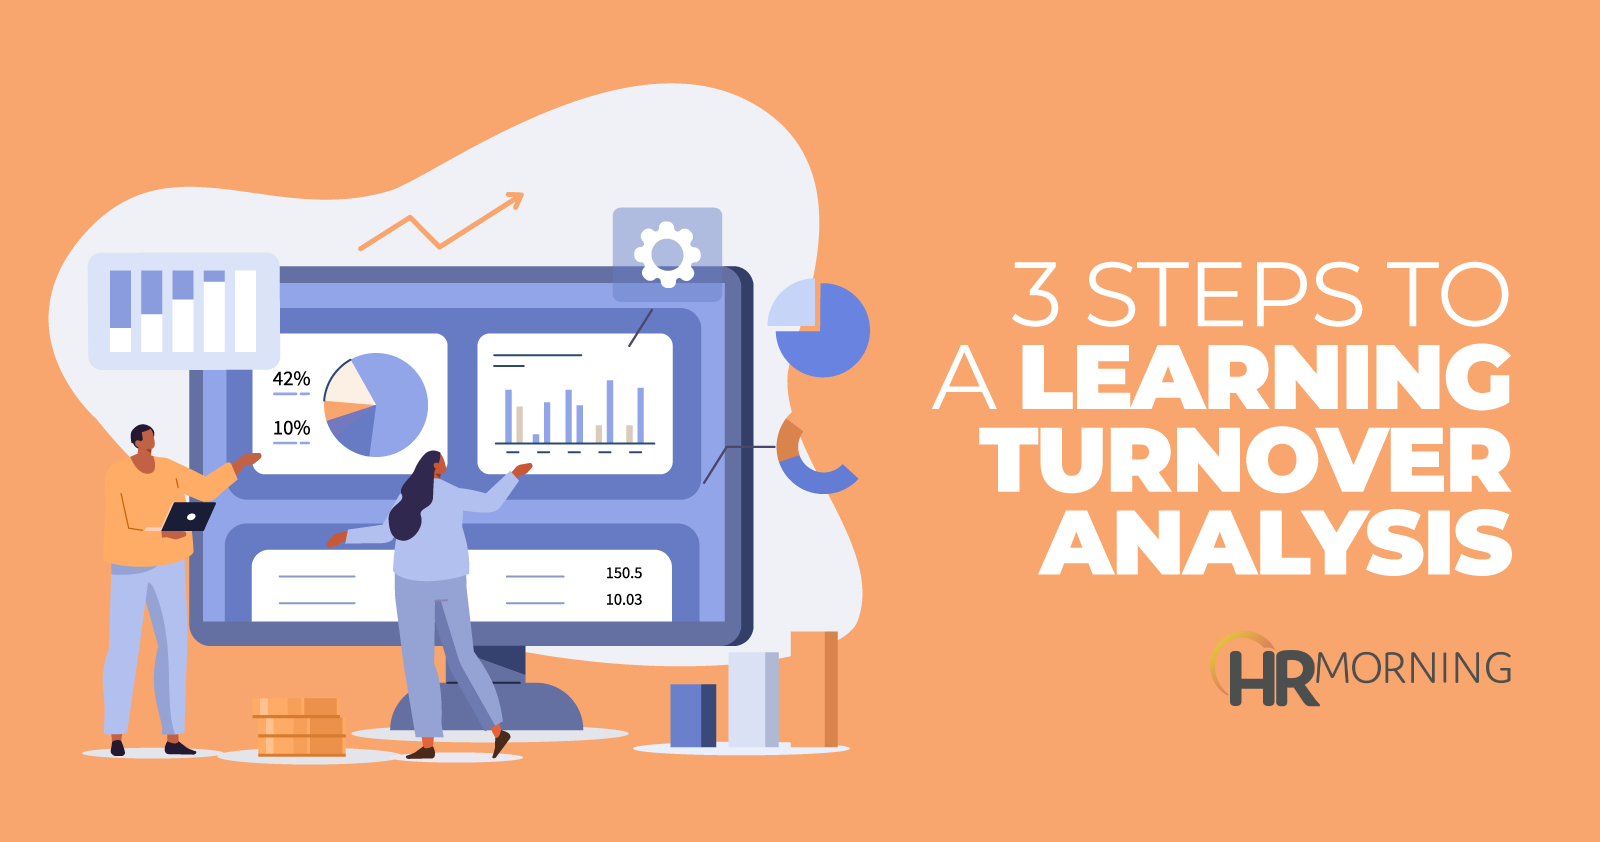 3 Steps To A Learning Turnover Analysis